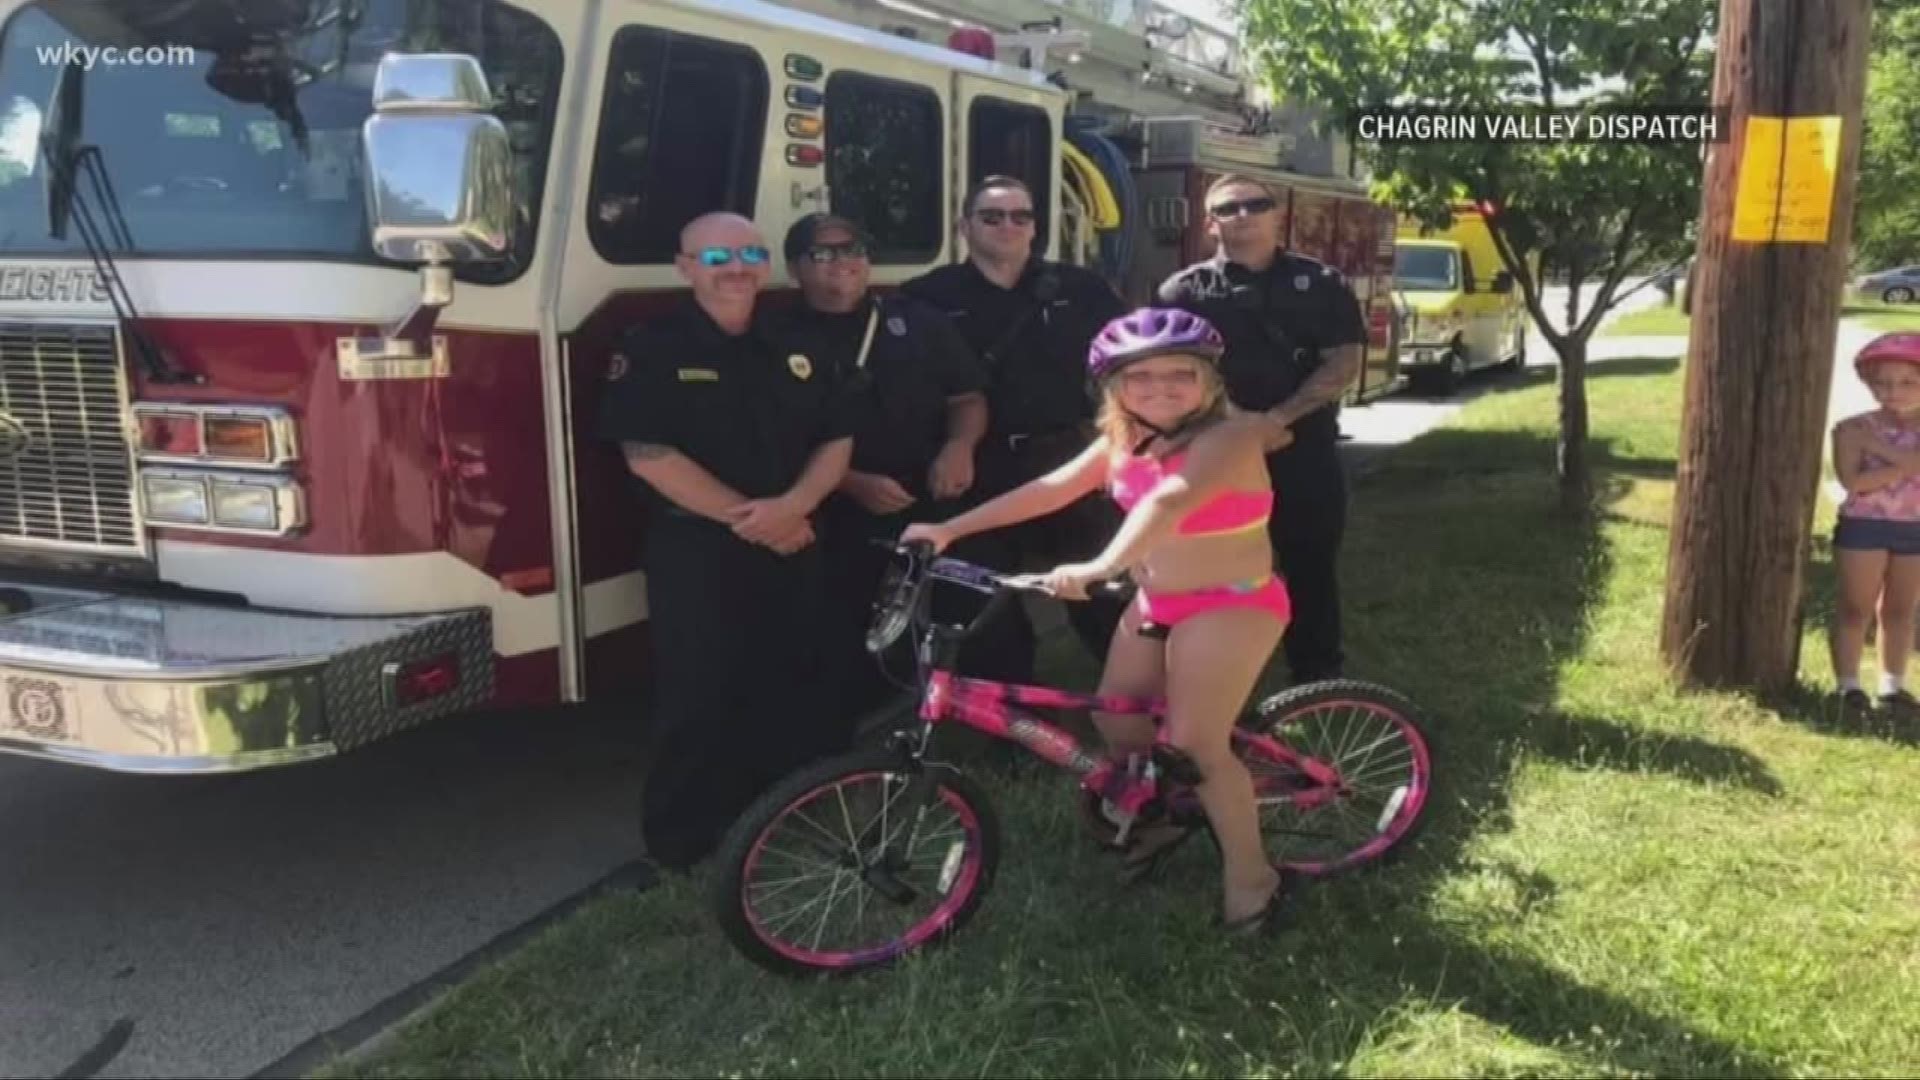 The firefighters only saw it right to help the little girl out. She had only minor injuries.